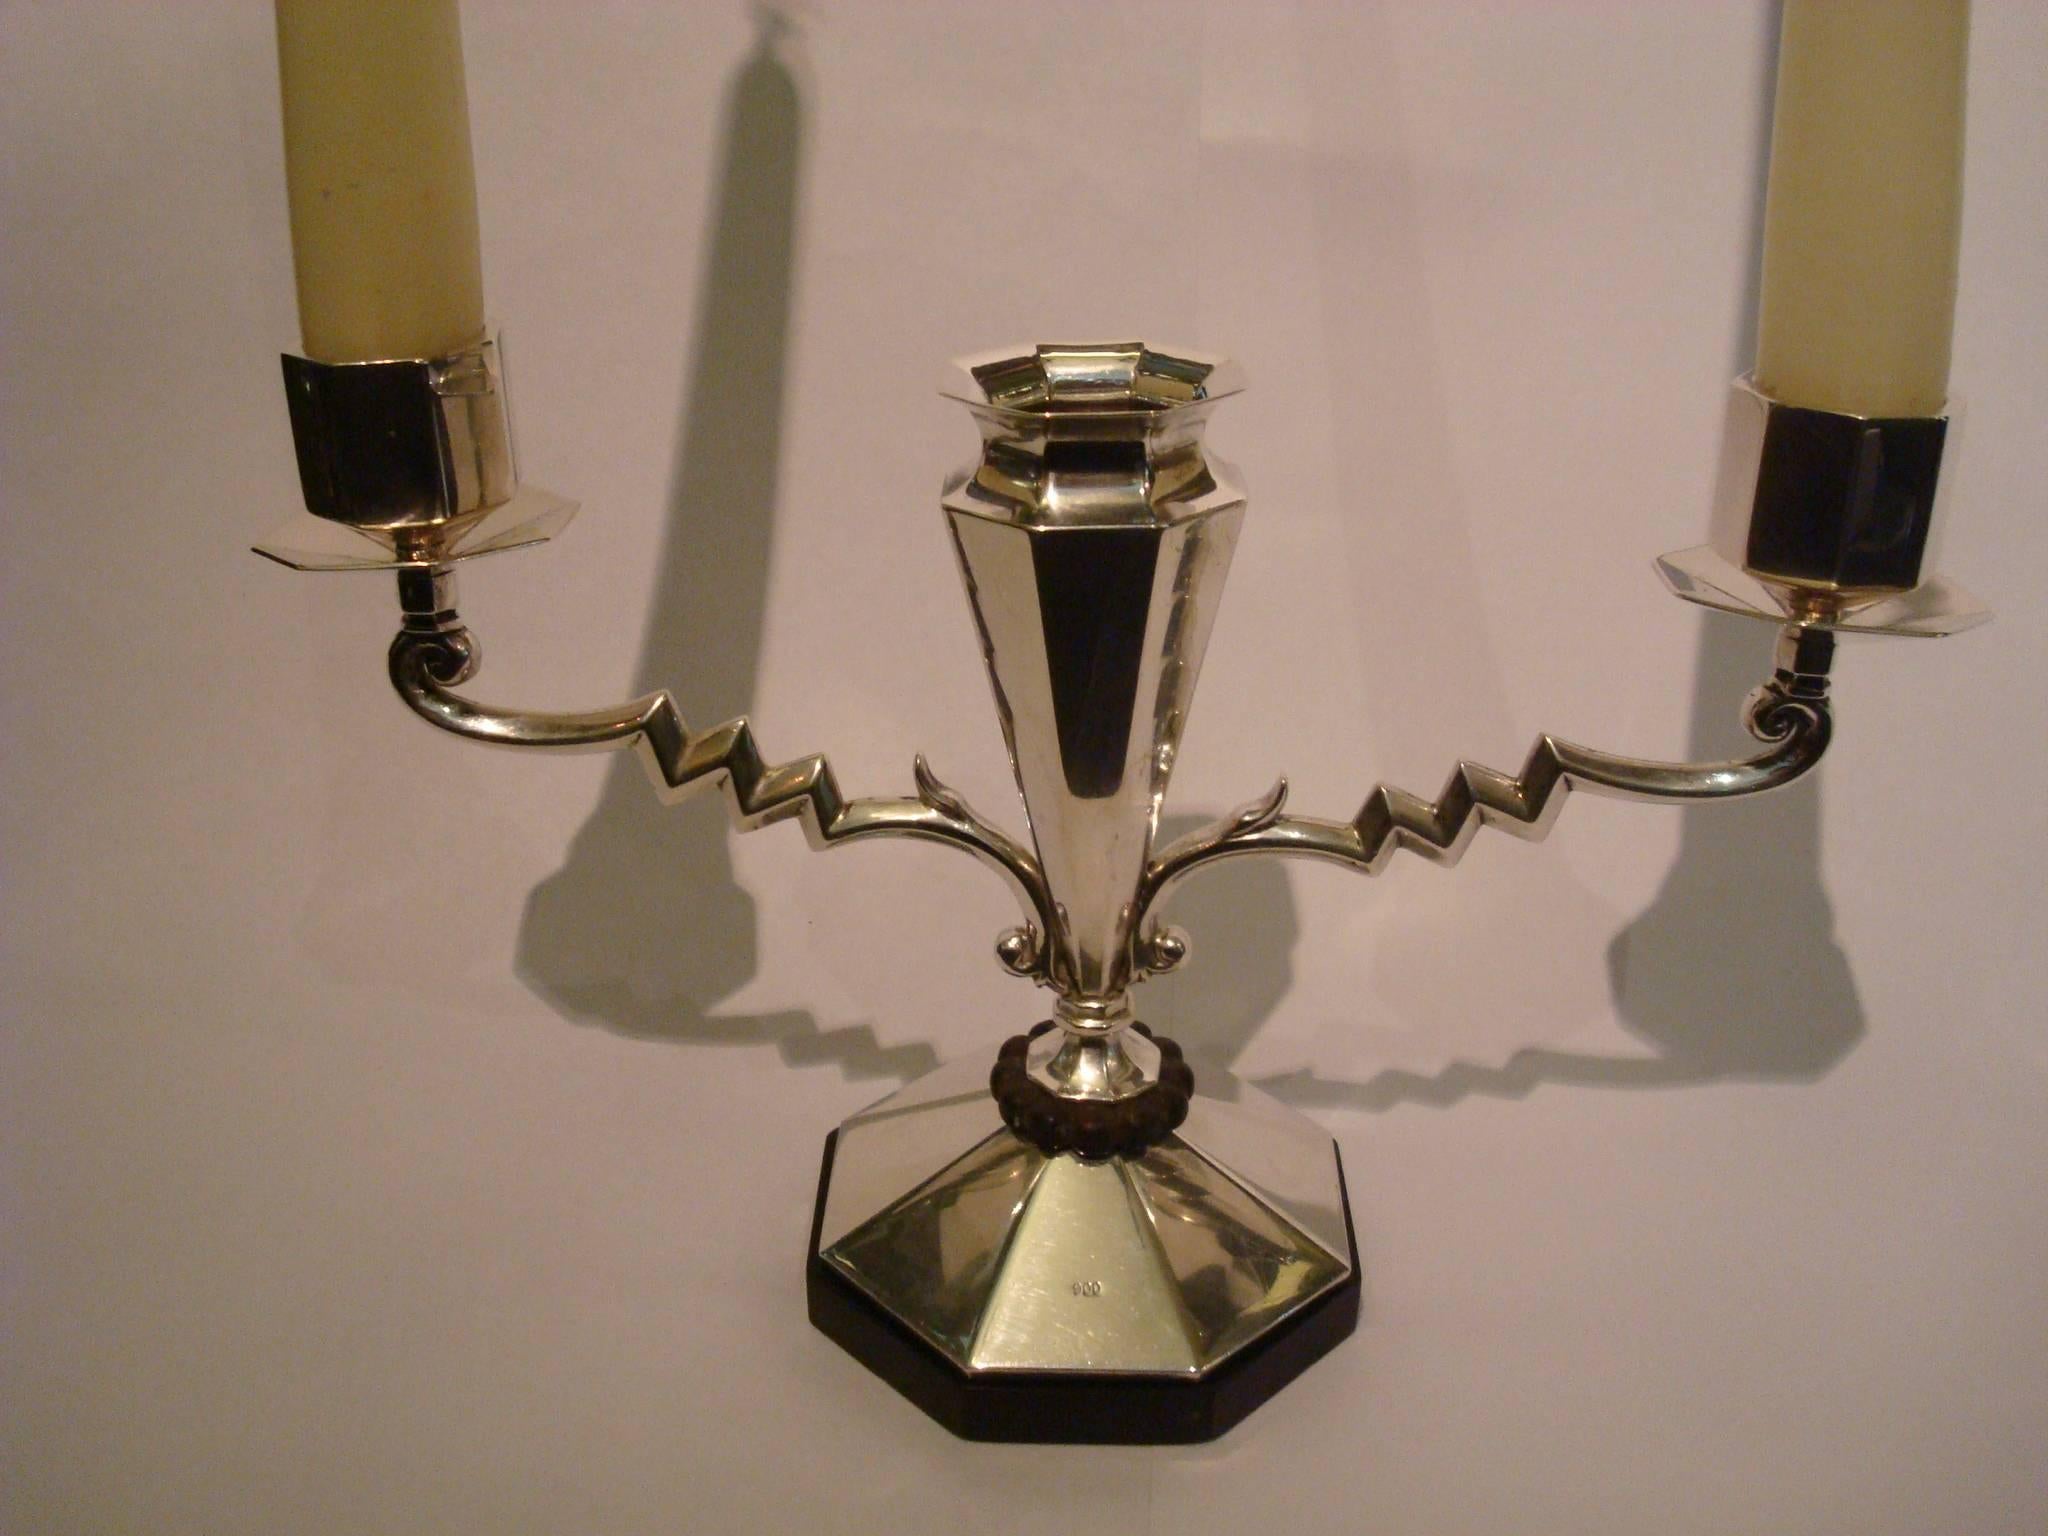 Pair of Art Deco silver candleholders with flower vase in the middle. Very nice set, in good conditions. Marked 900.